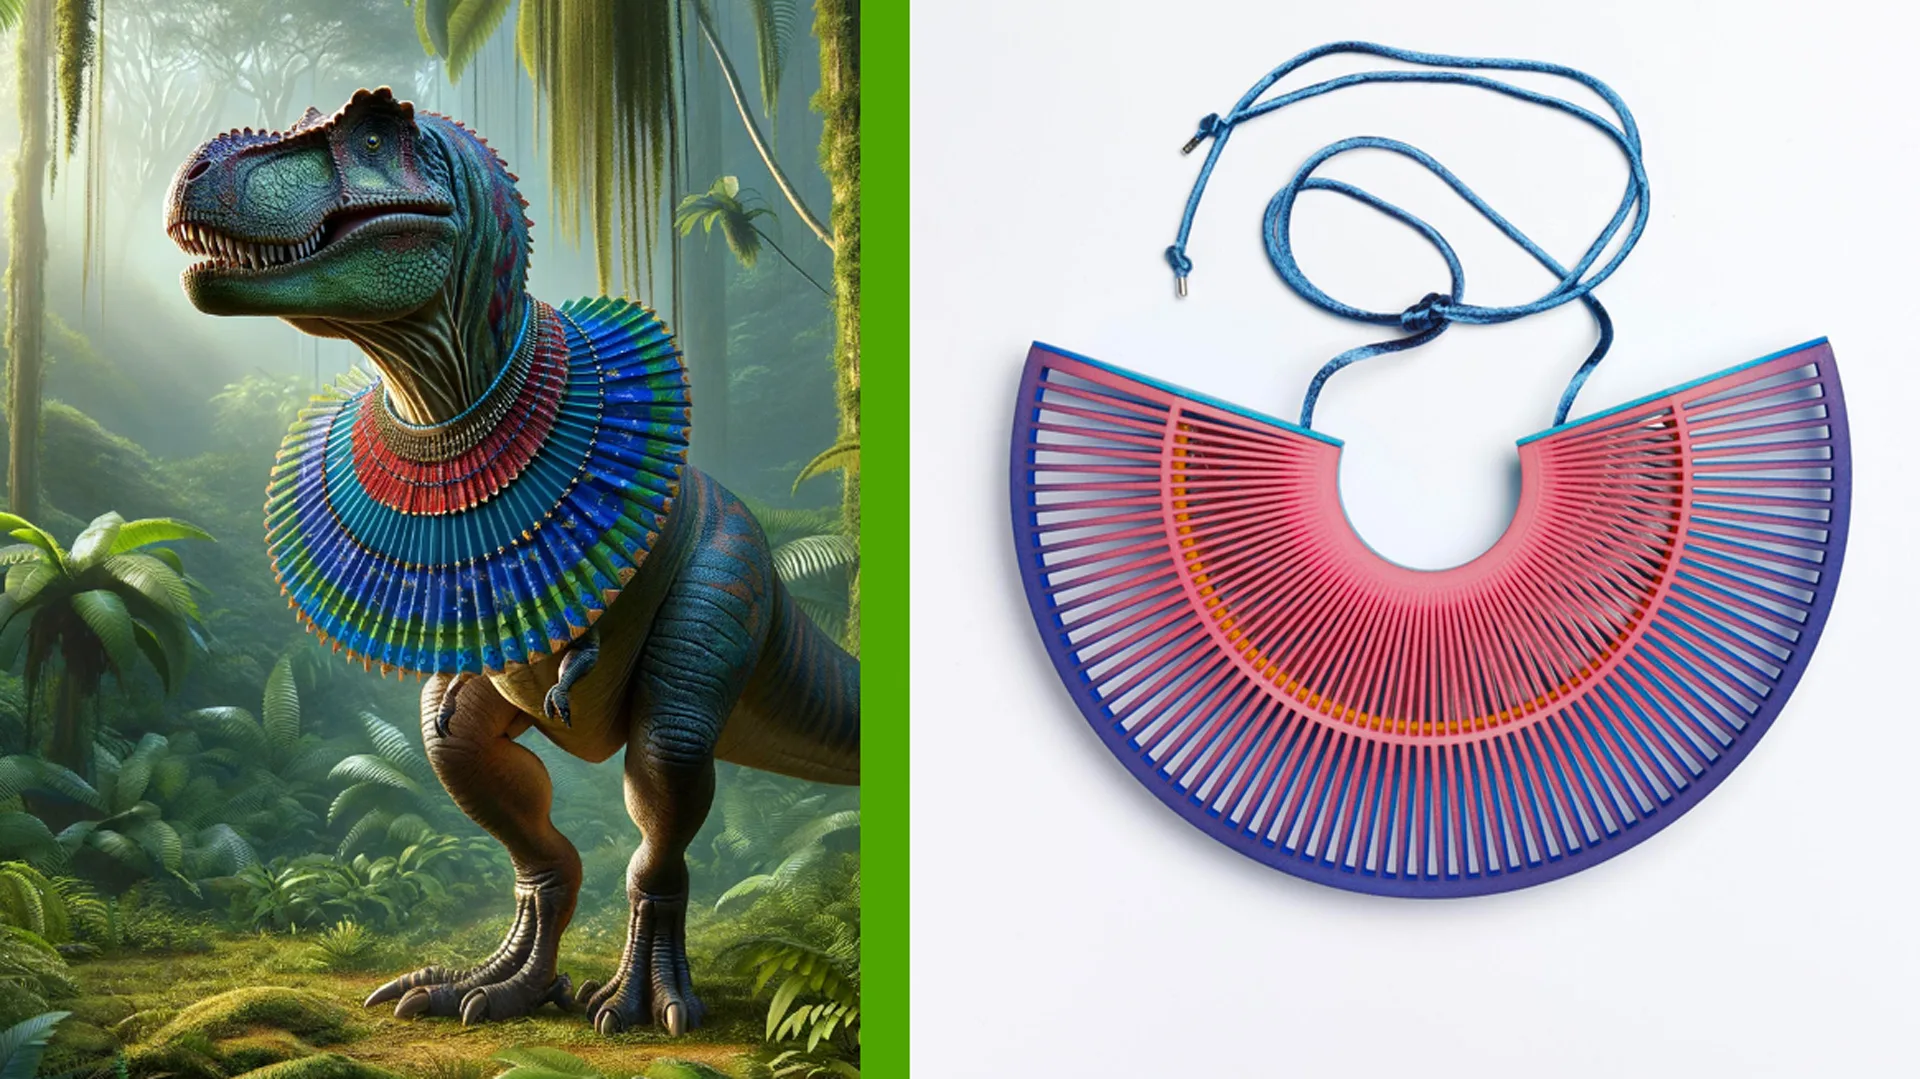 An AI generated image of a T-Rex wearing a blue and pink fan necklace next to the real image of the necklace from the V&A collection